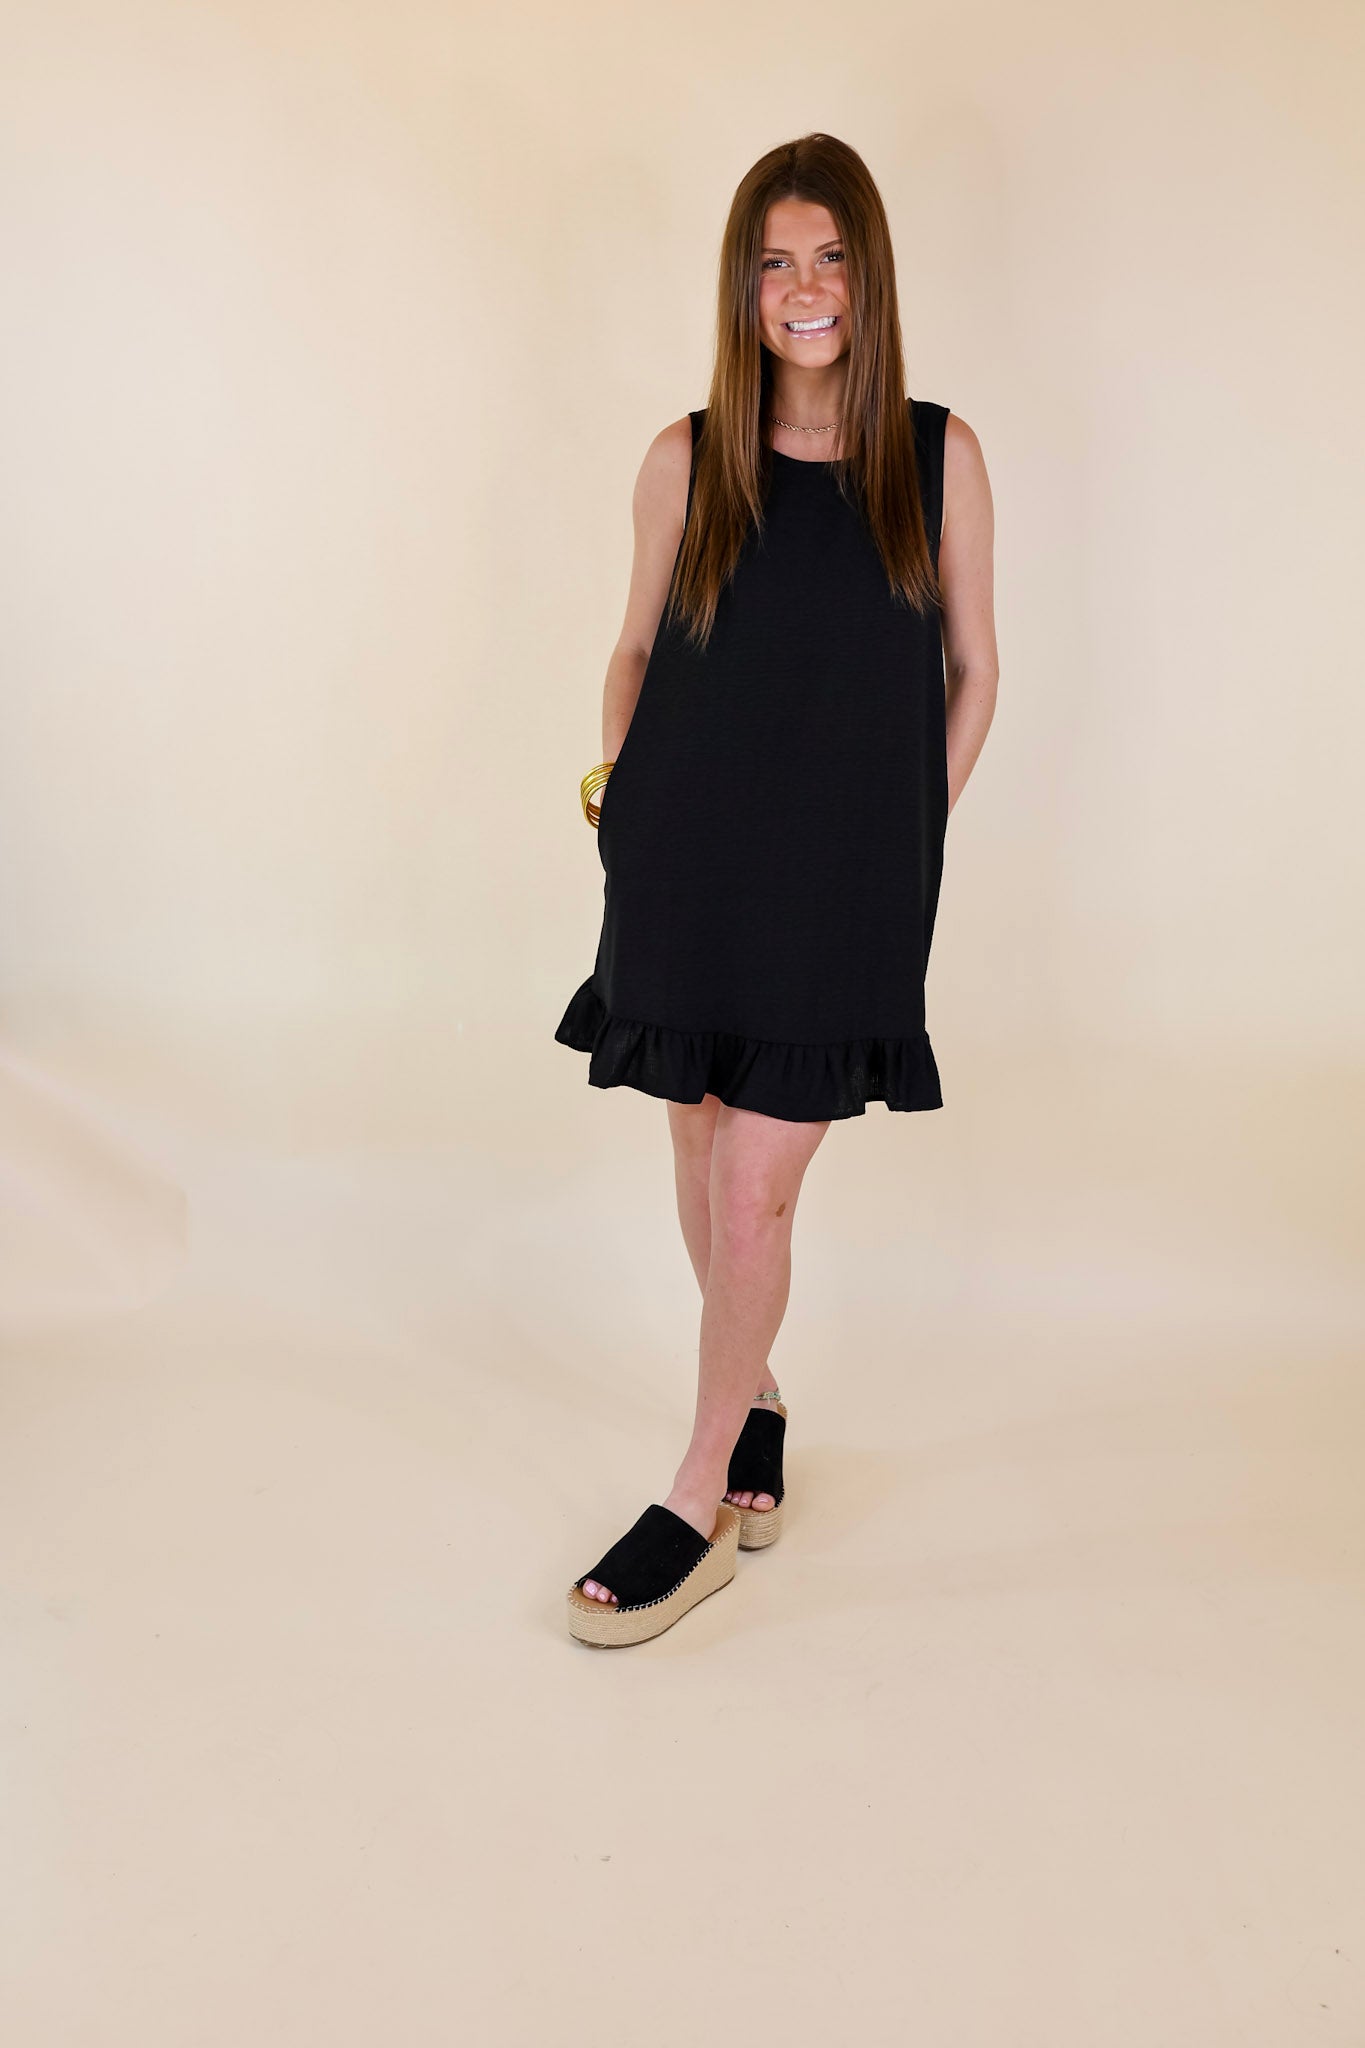 Perfectly Yours Tank Dress with Ruffle Hem in Black - Giddy Up Glamour Boutique